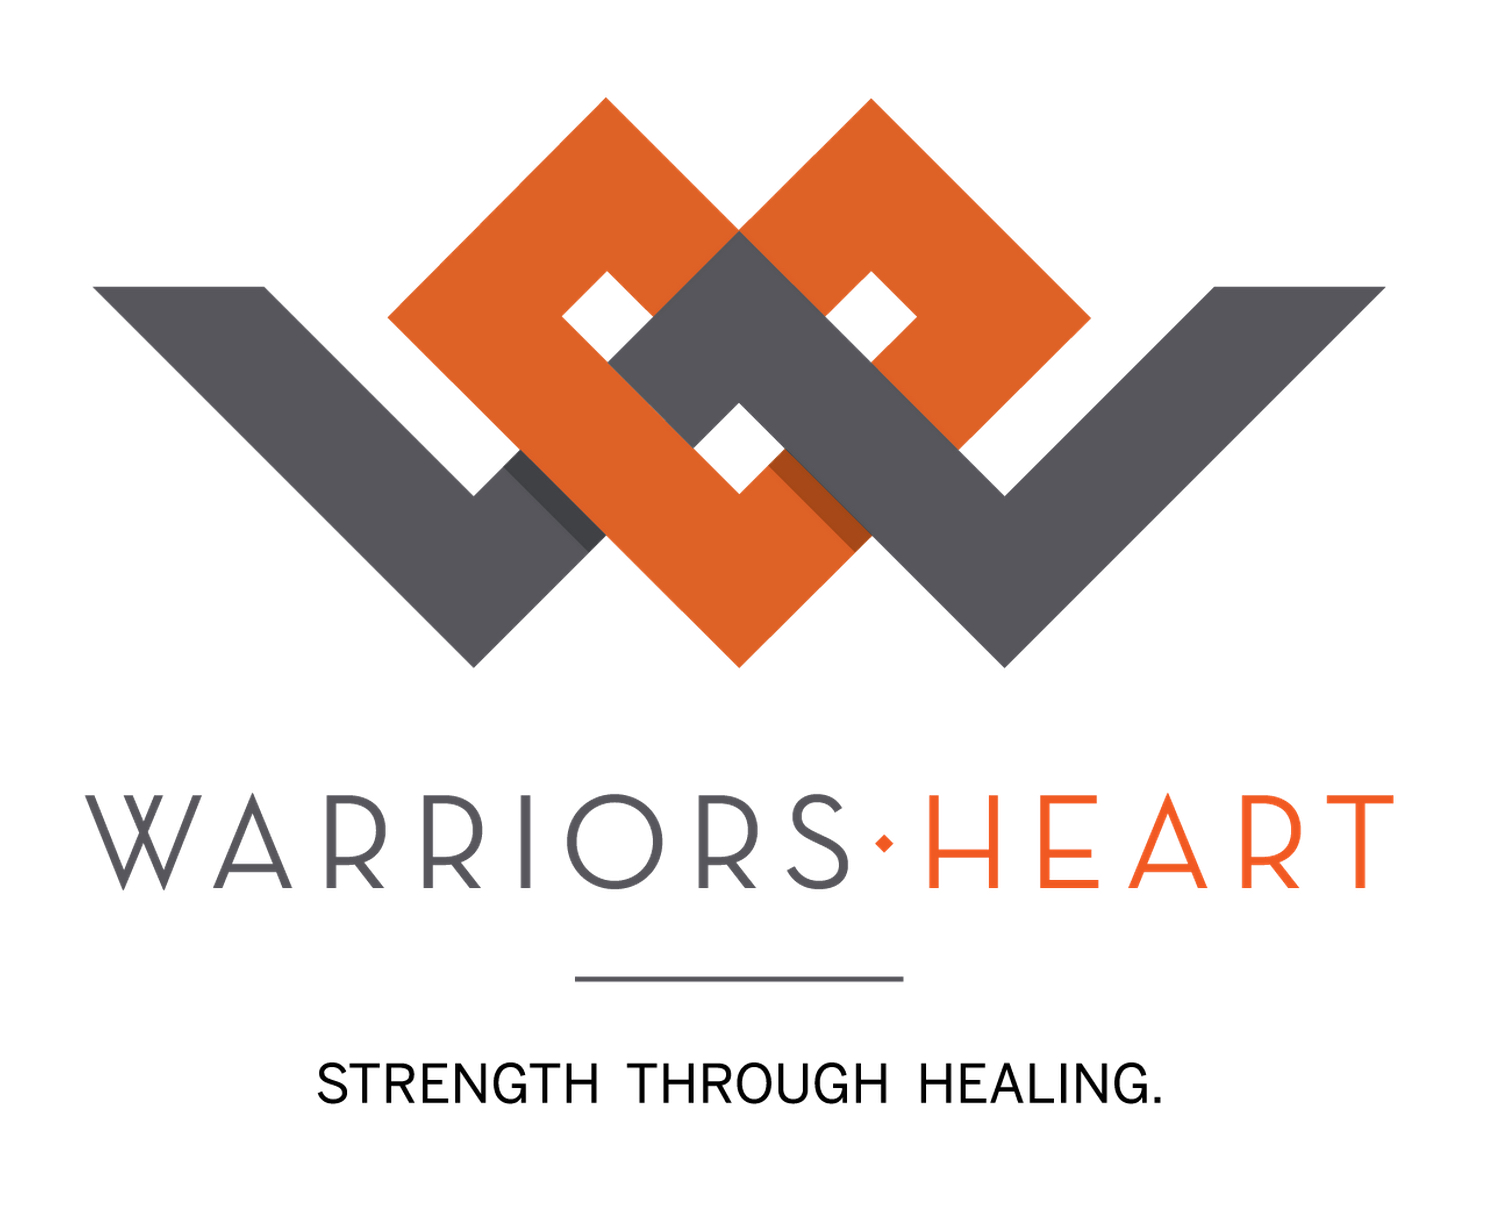 Warriors Heart, First Ever Addiction Healing Center in US for Warriors Only (Veterans, Military, Law Enforcement and First Responders)